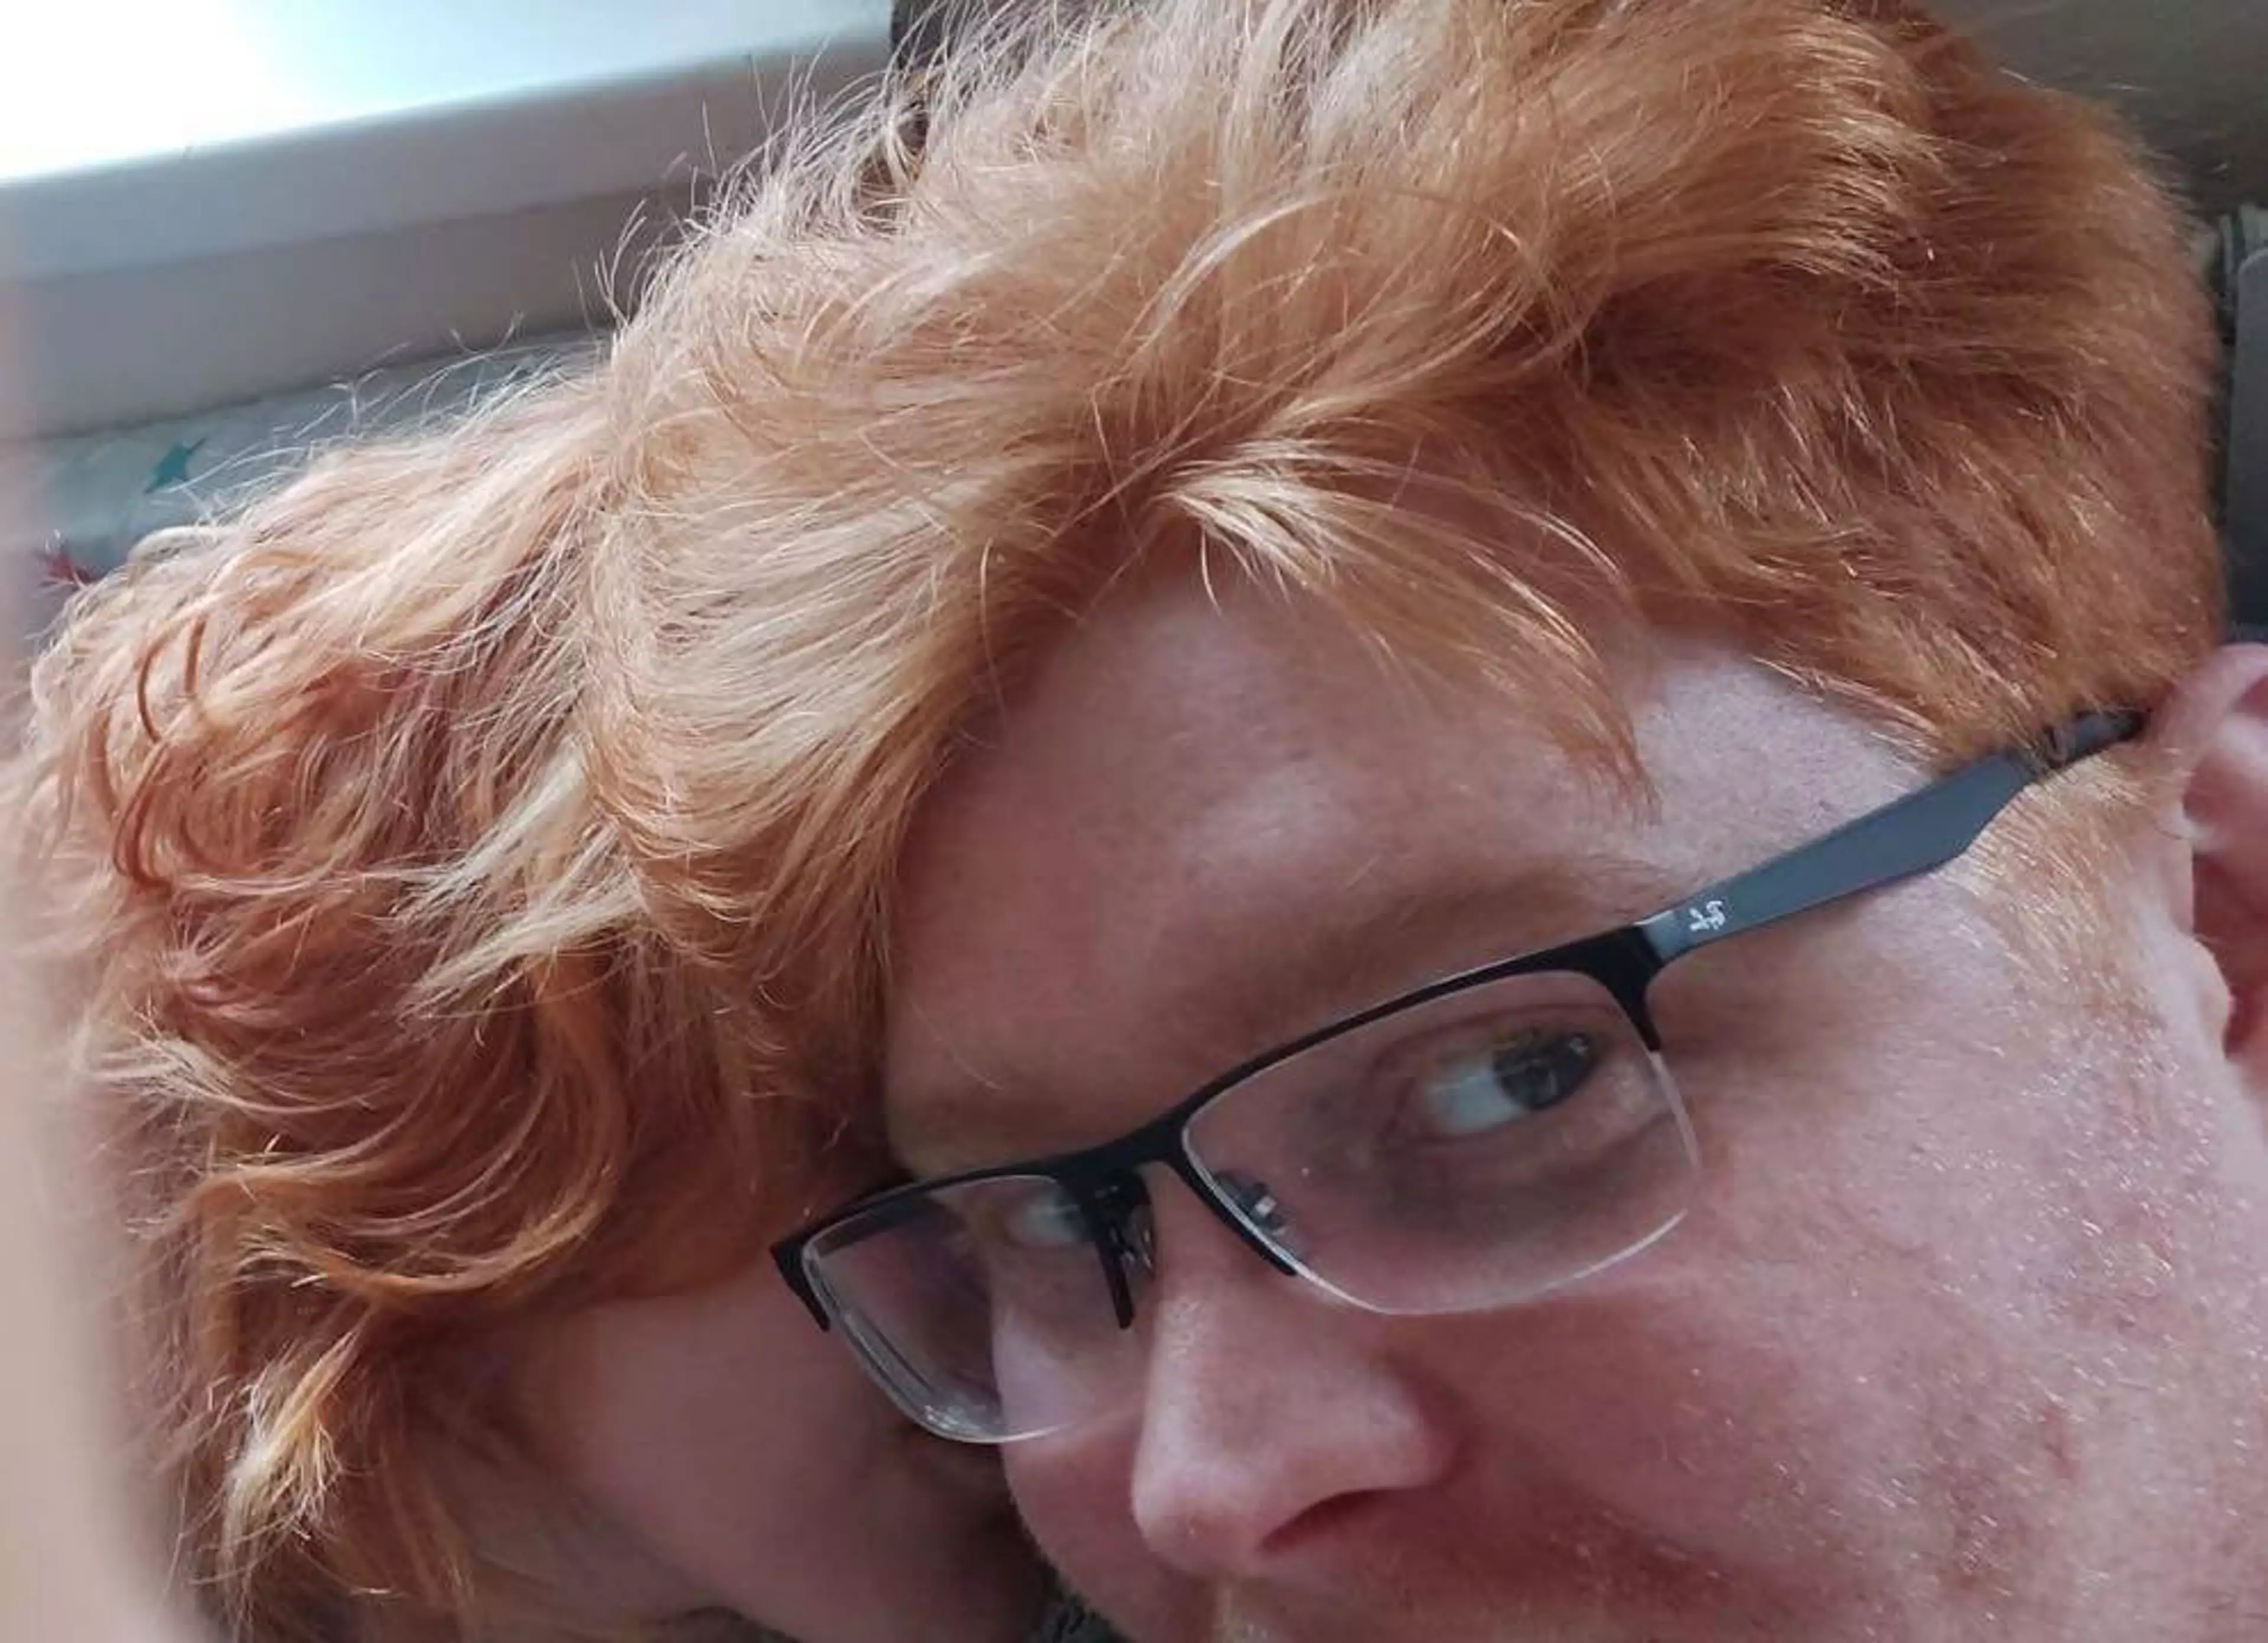 Bethany's hair went exactly the same colour as her husband's, who is a natural ginger (